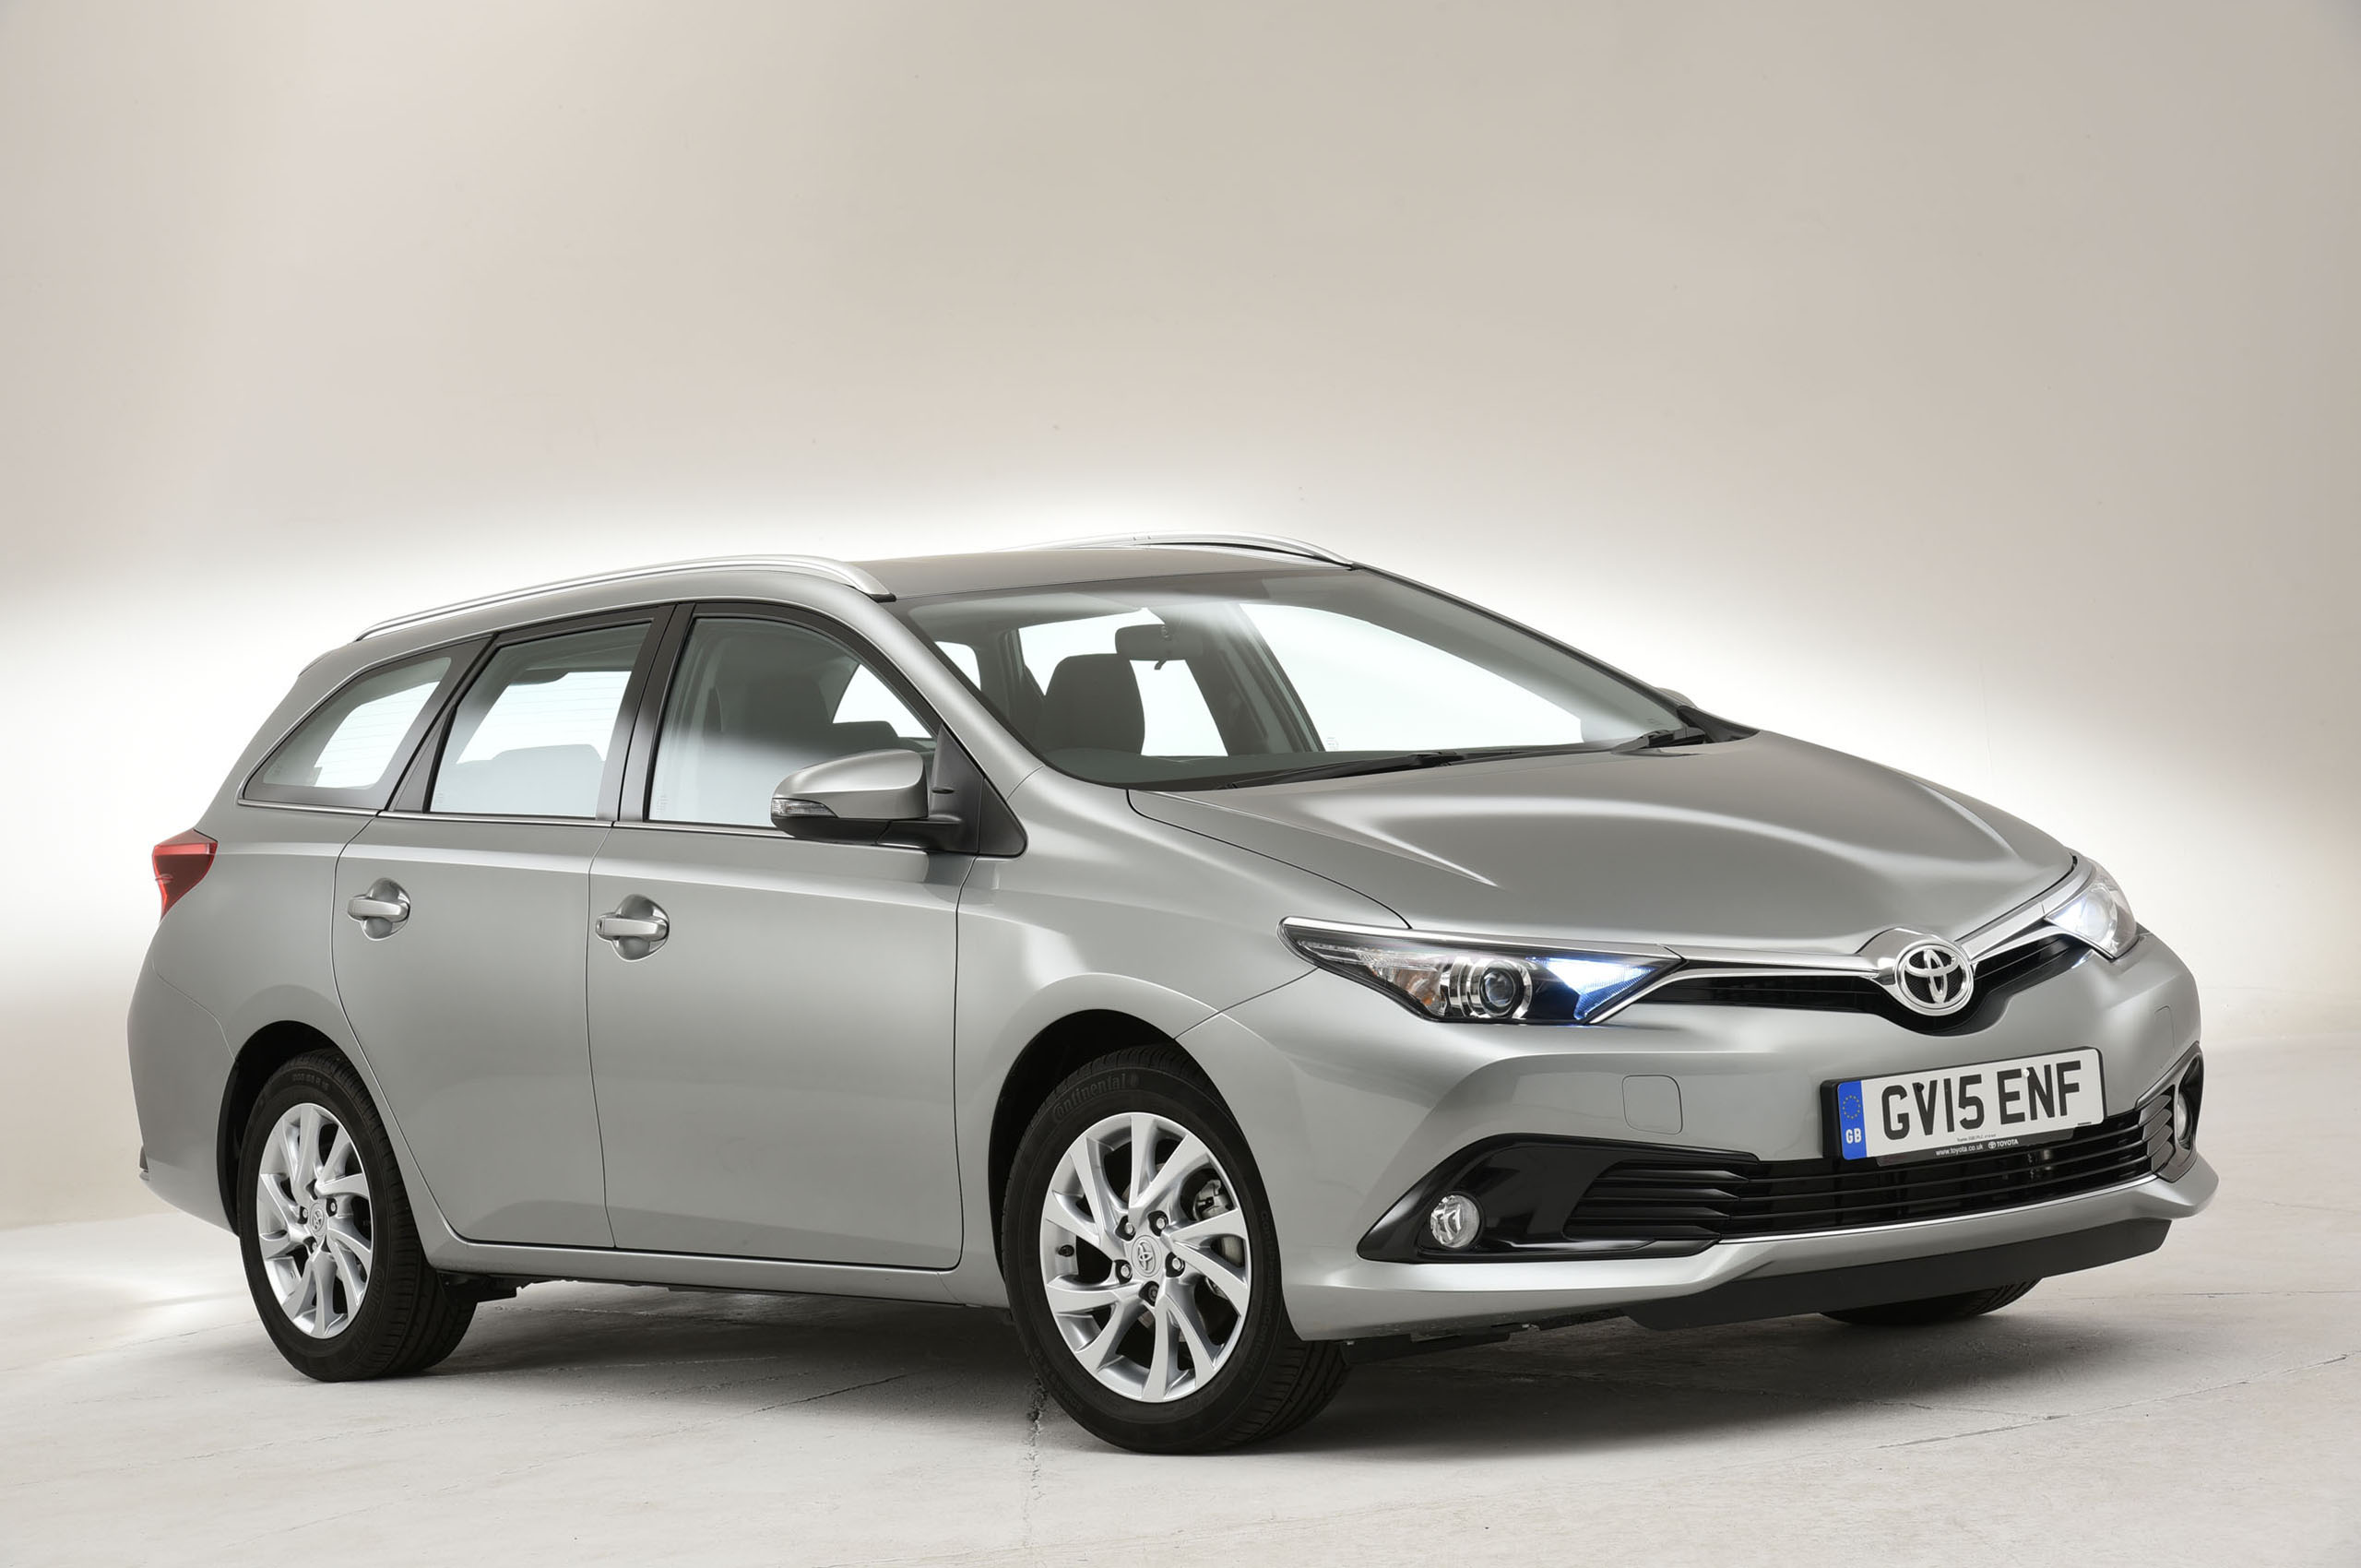 Used Toyota Auris Touring Sports 2012-2018 review